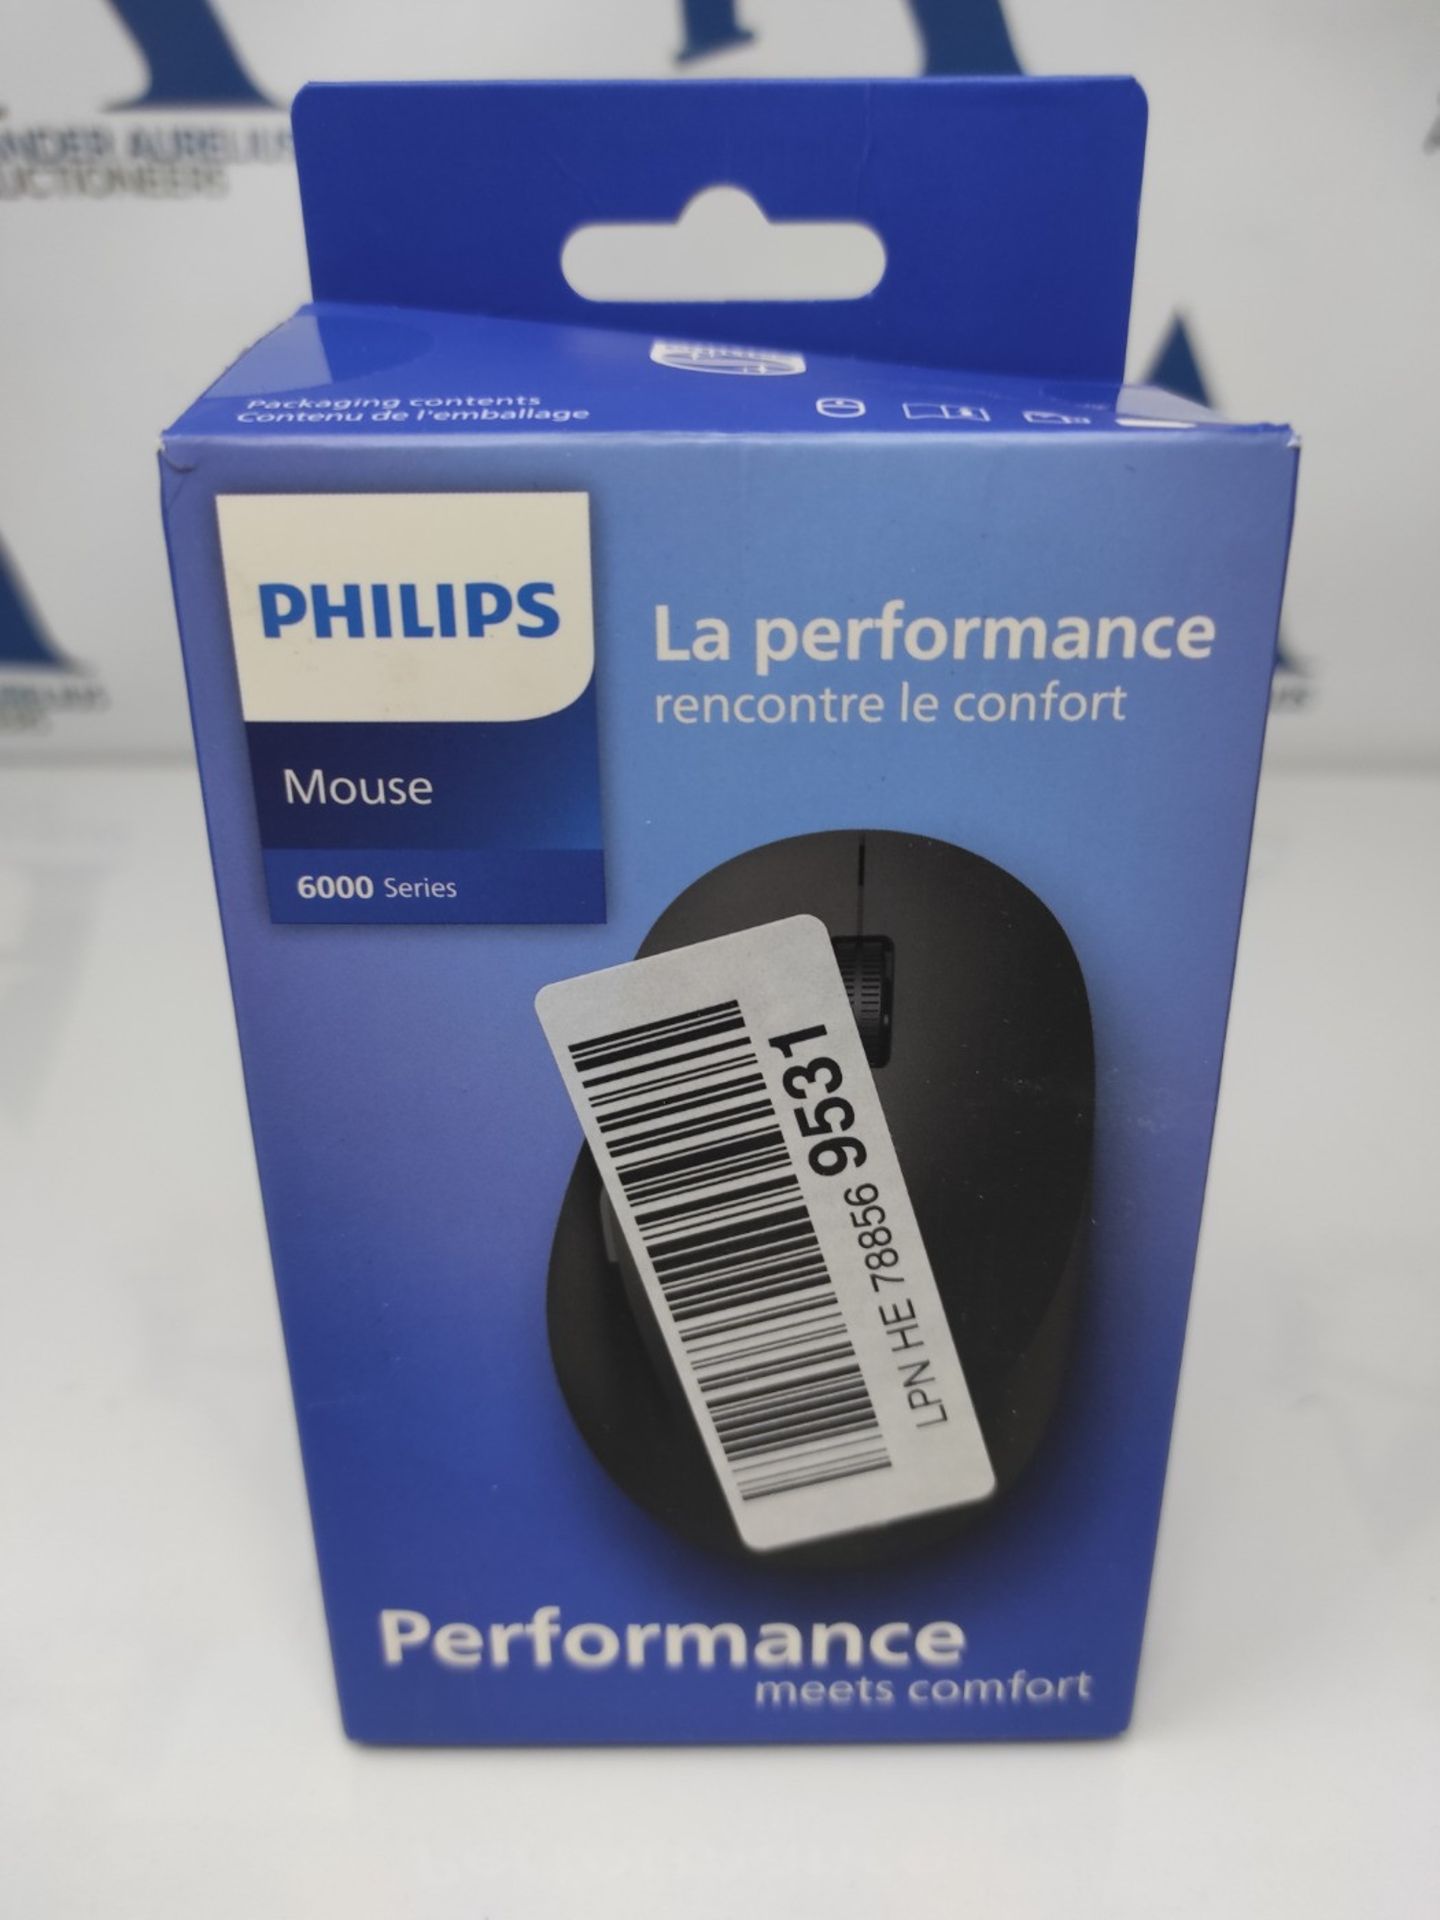 Philips SPK7607 Wireless Mouse - up to 3200 dpi, 2.4 GHz + Bluetooth 3.0/5.0, Silent C - Image 2 of 3